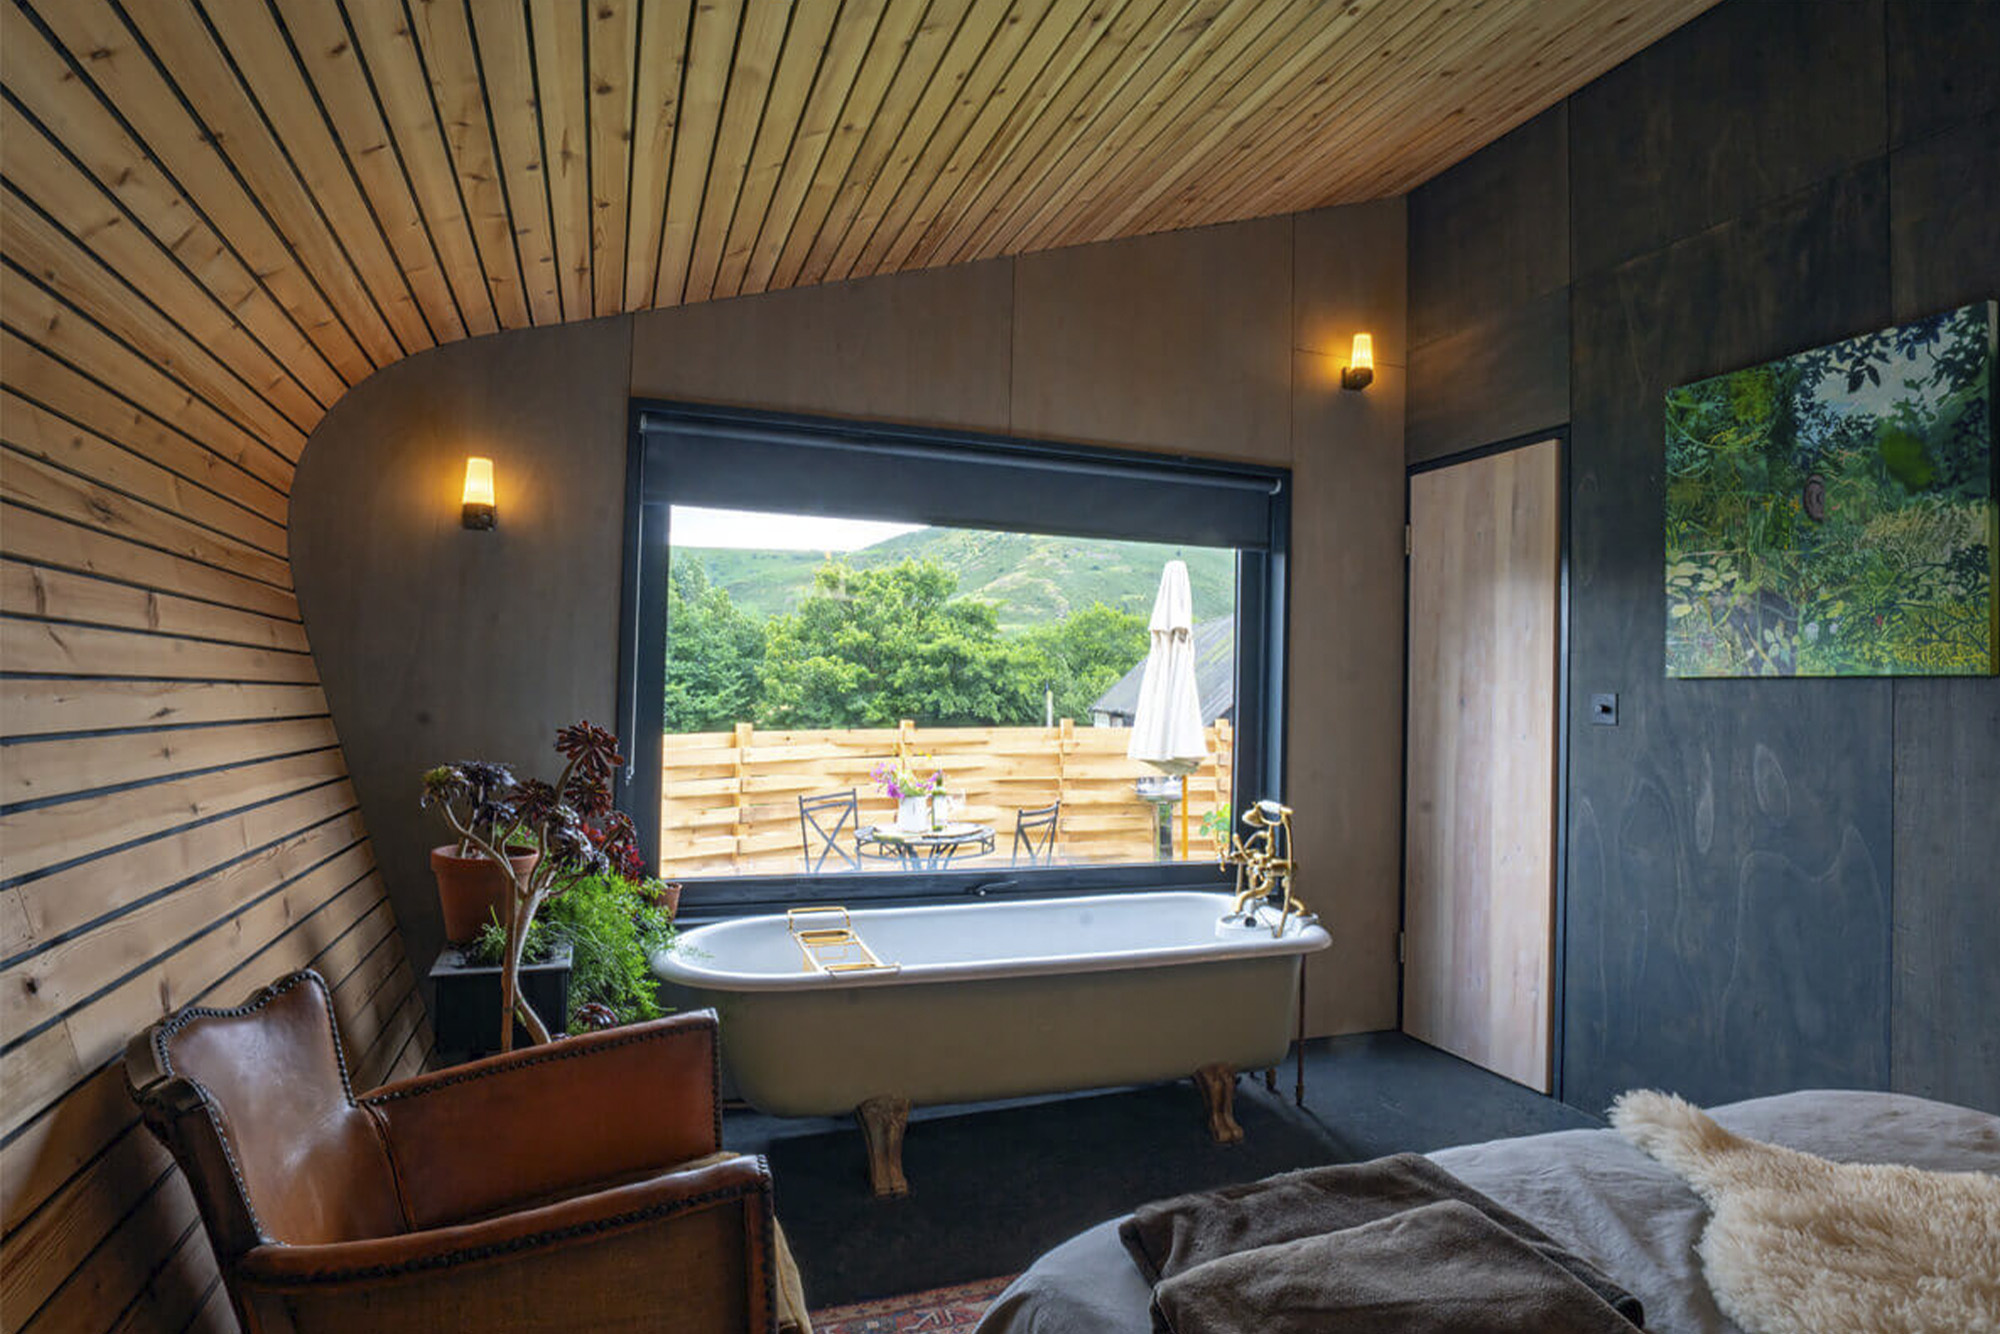 Hergest Lee Cabin & Lean-To Cabin in Wales, UK for rent. interior shows curved wooden side on the left curling up towards the ceiling with window